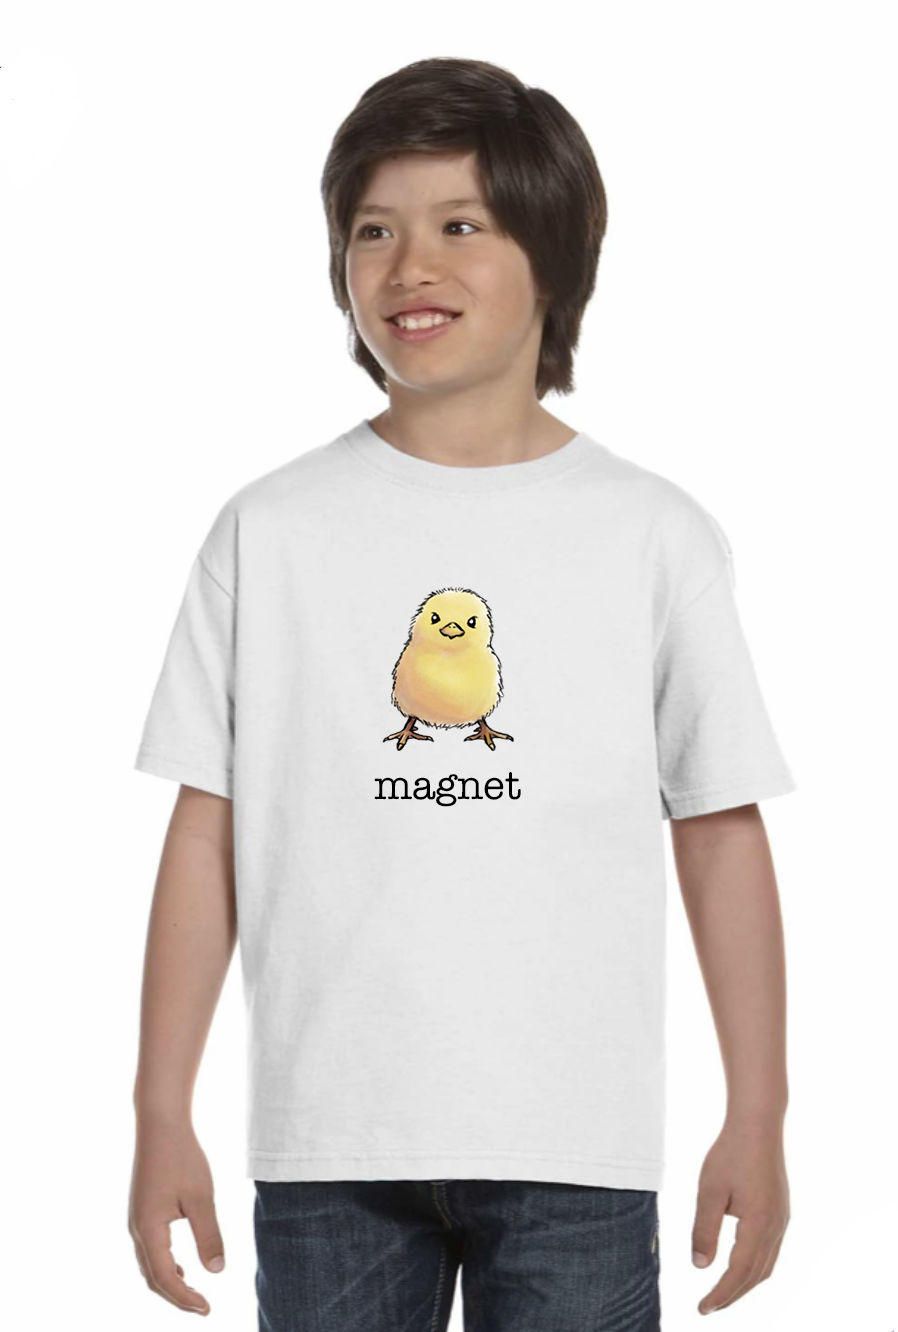 "Chick Magnet" tee